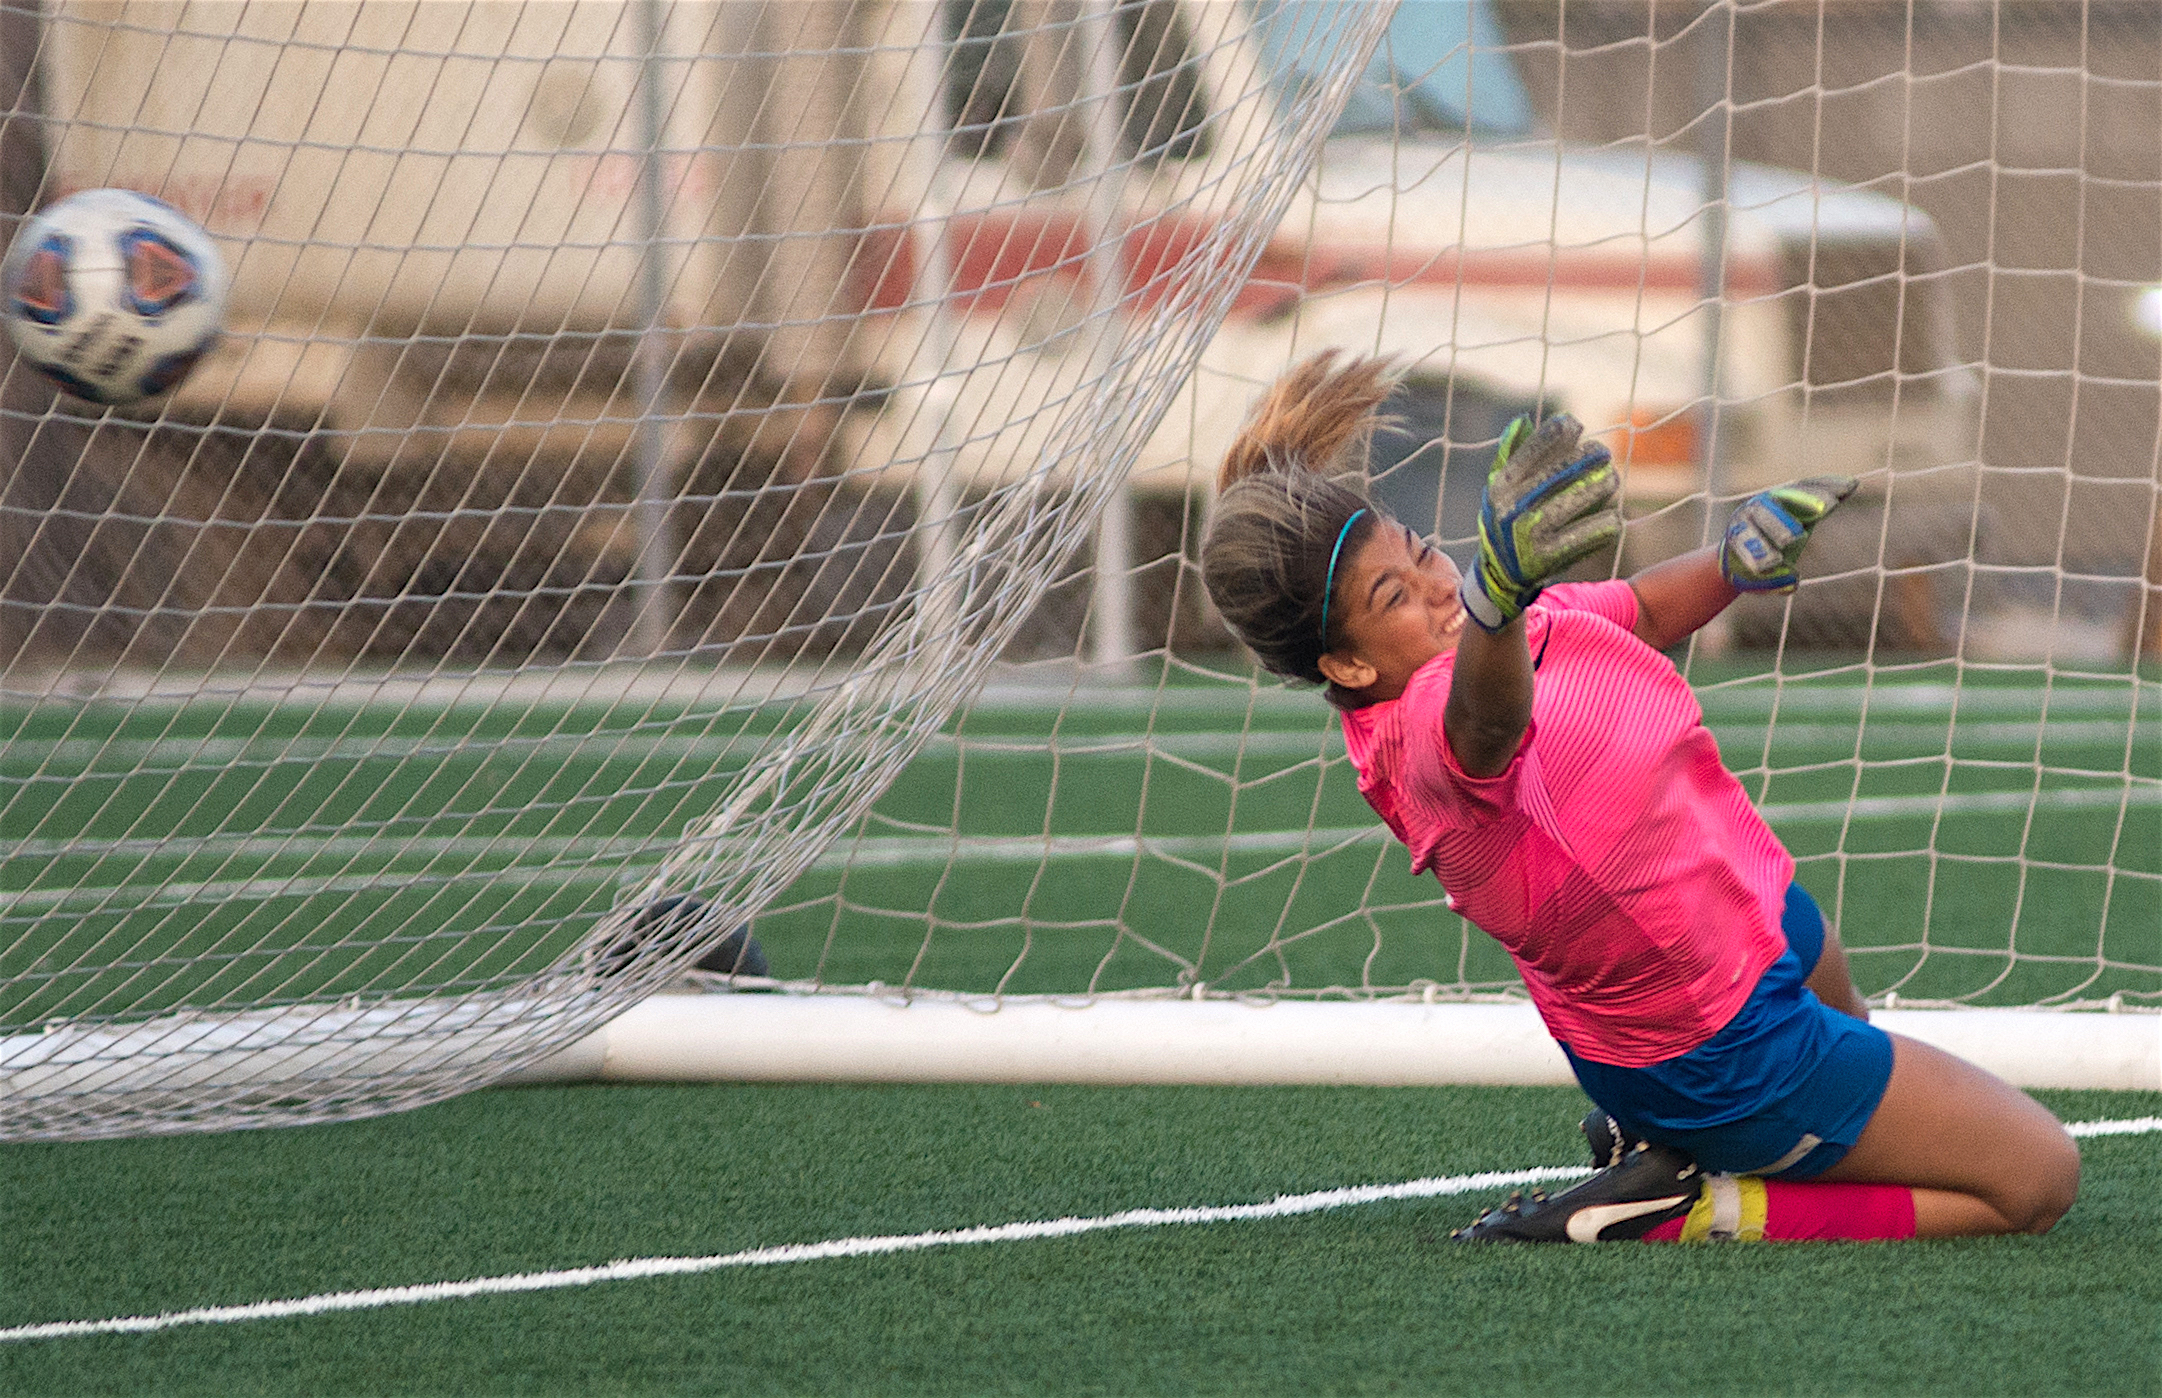  Santa Monica College Corsair Goalkeeper Emma Romero dives in an attempt to block the ball during the Penalty Shootout on Saturday, November 18, 2017, at Orange Coast College in Costa Mesa, California. The Corsairs lose 3-2 in penalty kicks. (Josue M